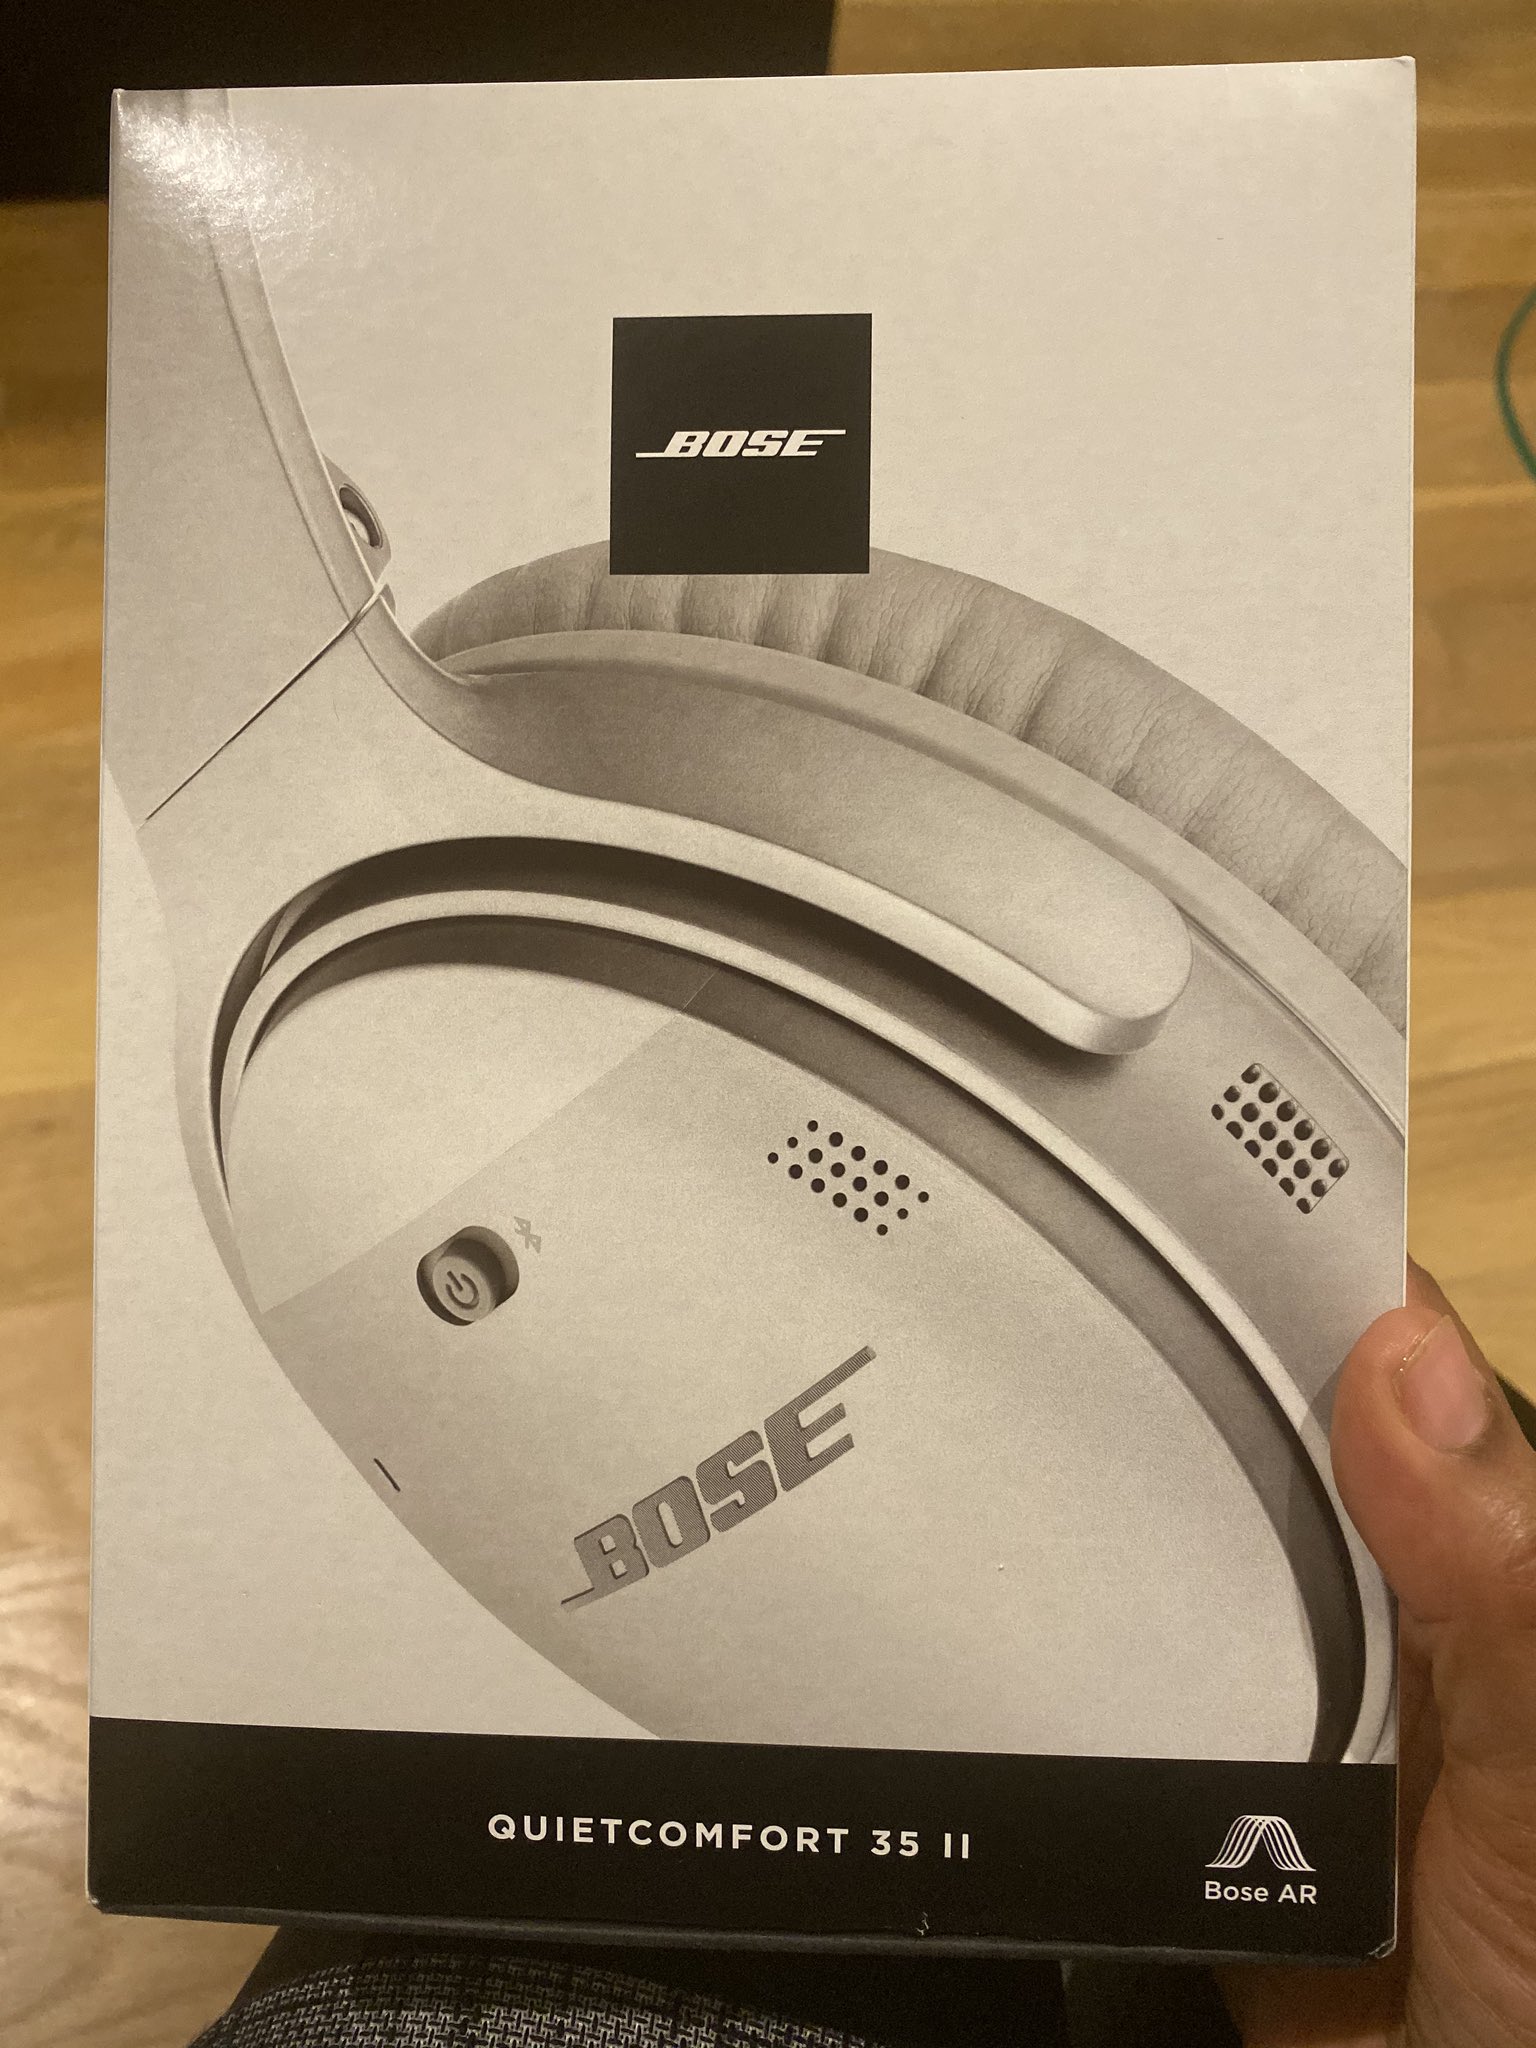 Bose on Twitter: finally time! To get excited for Star Wars: The Rise of Skywalker, check out the #BoseAR experience in the @starwars app. Learn more: © 2019 &amp;